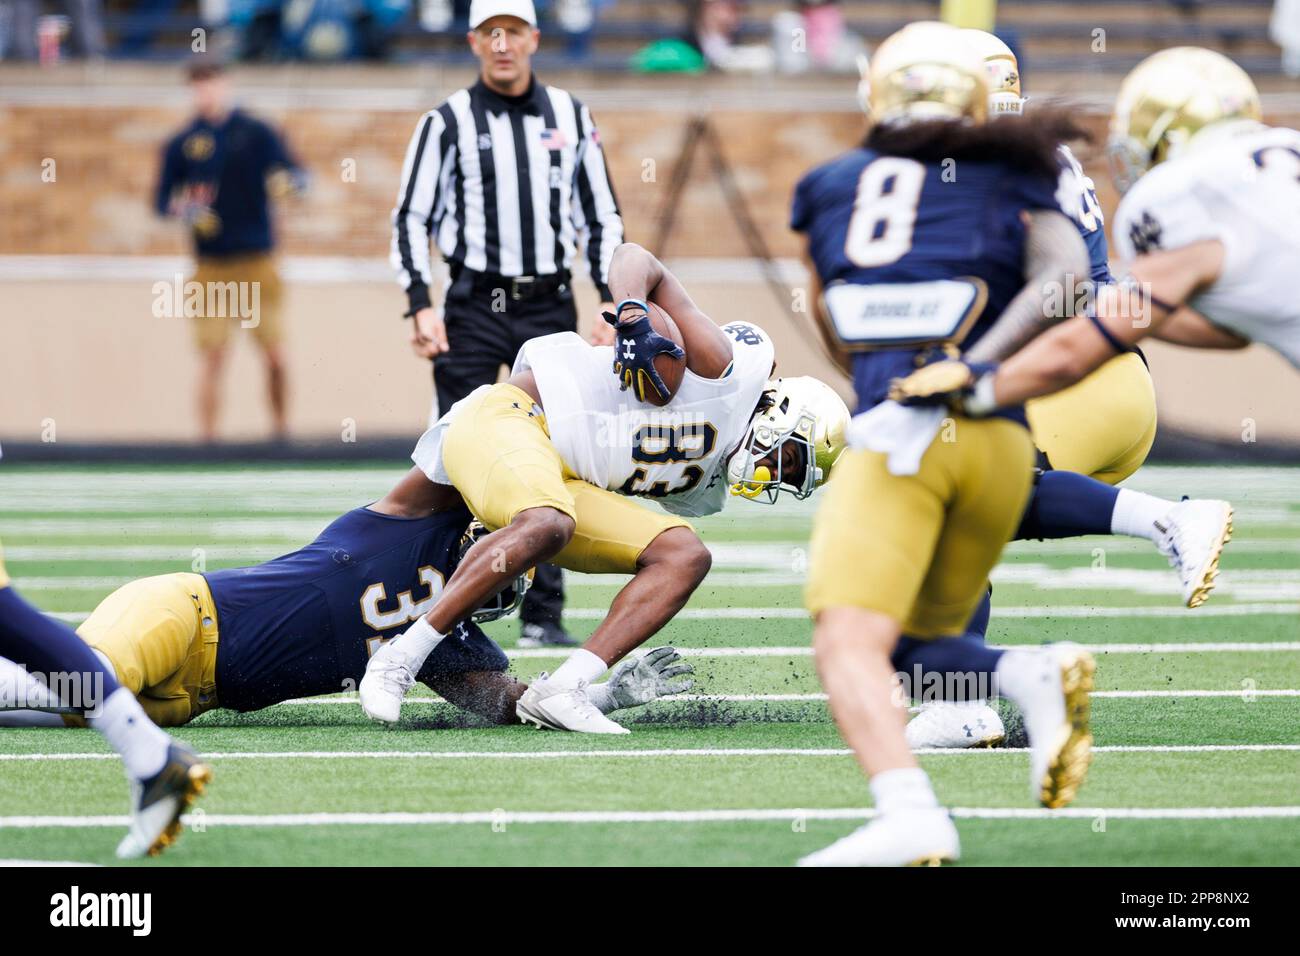 South Bend, Indiana, USA. 22nd Apr, 2023. Notre Dame defensive lineman Nana Osafo-Mensah (31) makes the tackle on Notre Dame wide receiver Jayden Thomas (83) during the Notre Dame Annual Blue-Gold Spring football game at Notre Dame Stadium in South Bend, Indiana. Gold defeated Blue 24-0. John Mersits/CSM/Alamy Live News Stock Photo